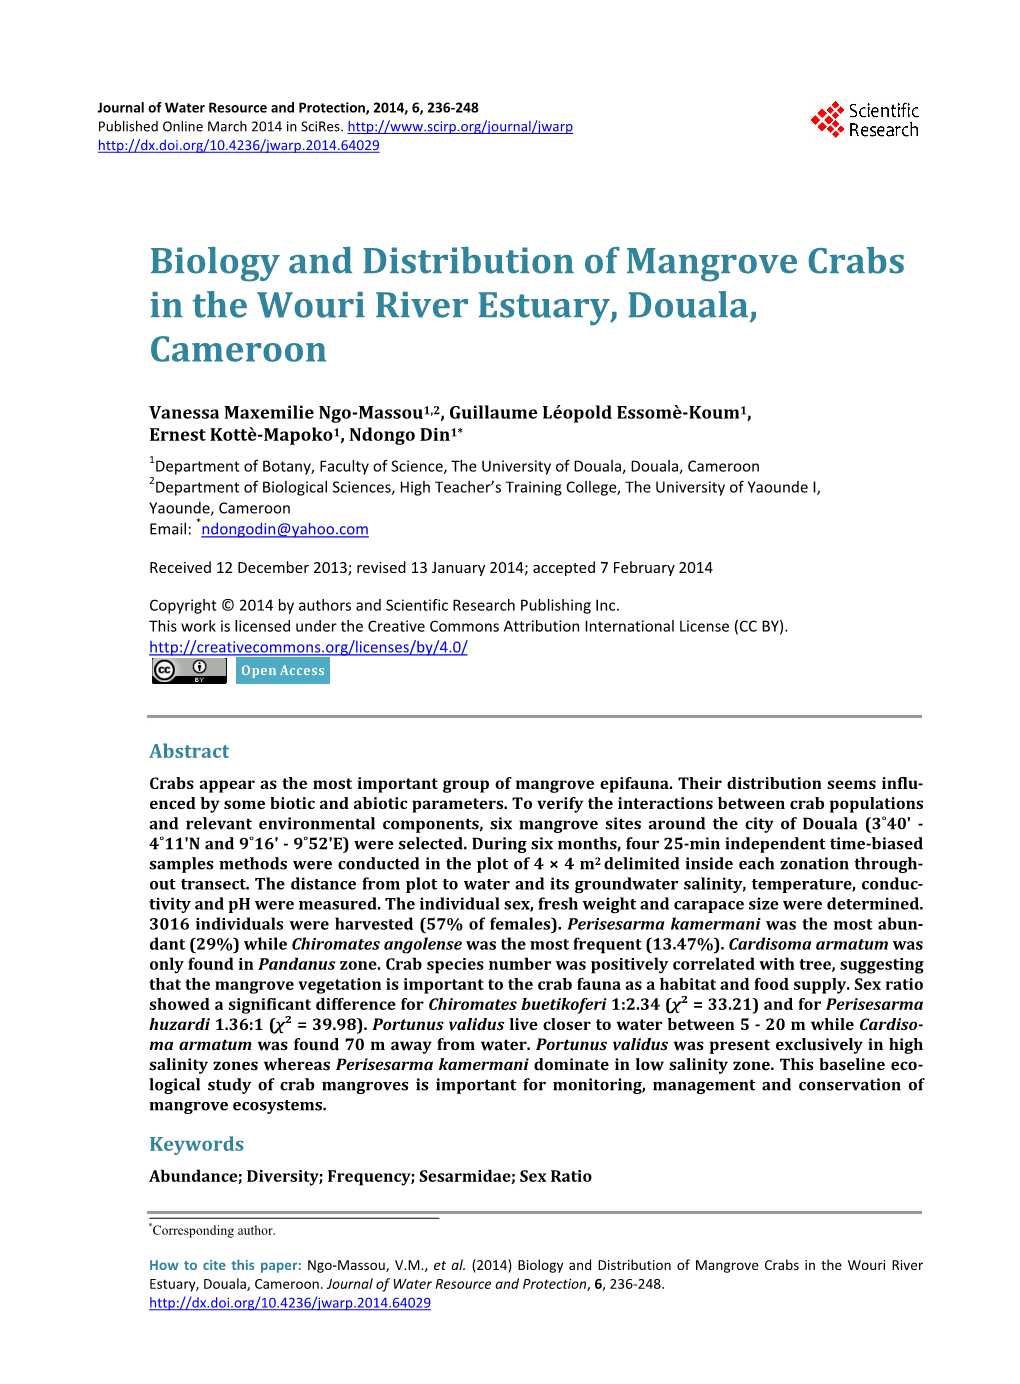 Biology and Distribution of Mangrove Crabs in the Wouri River Estuary, Douala, Cameroon